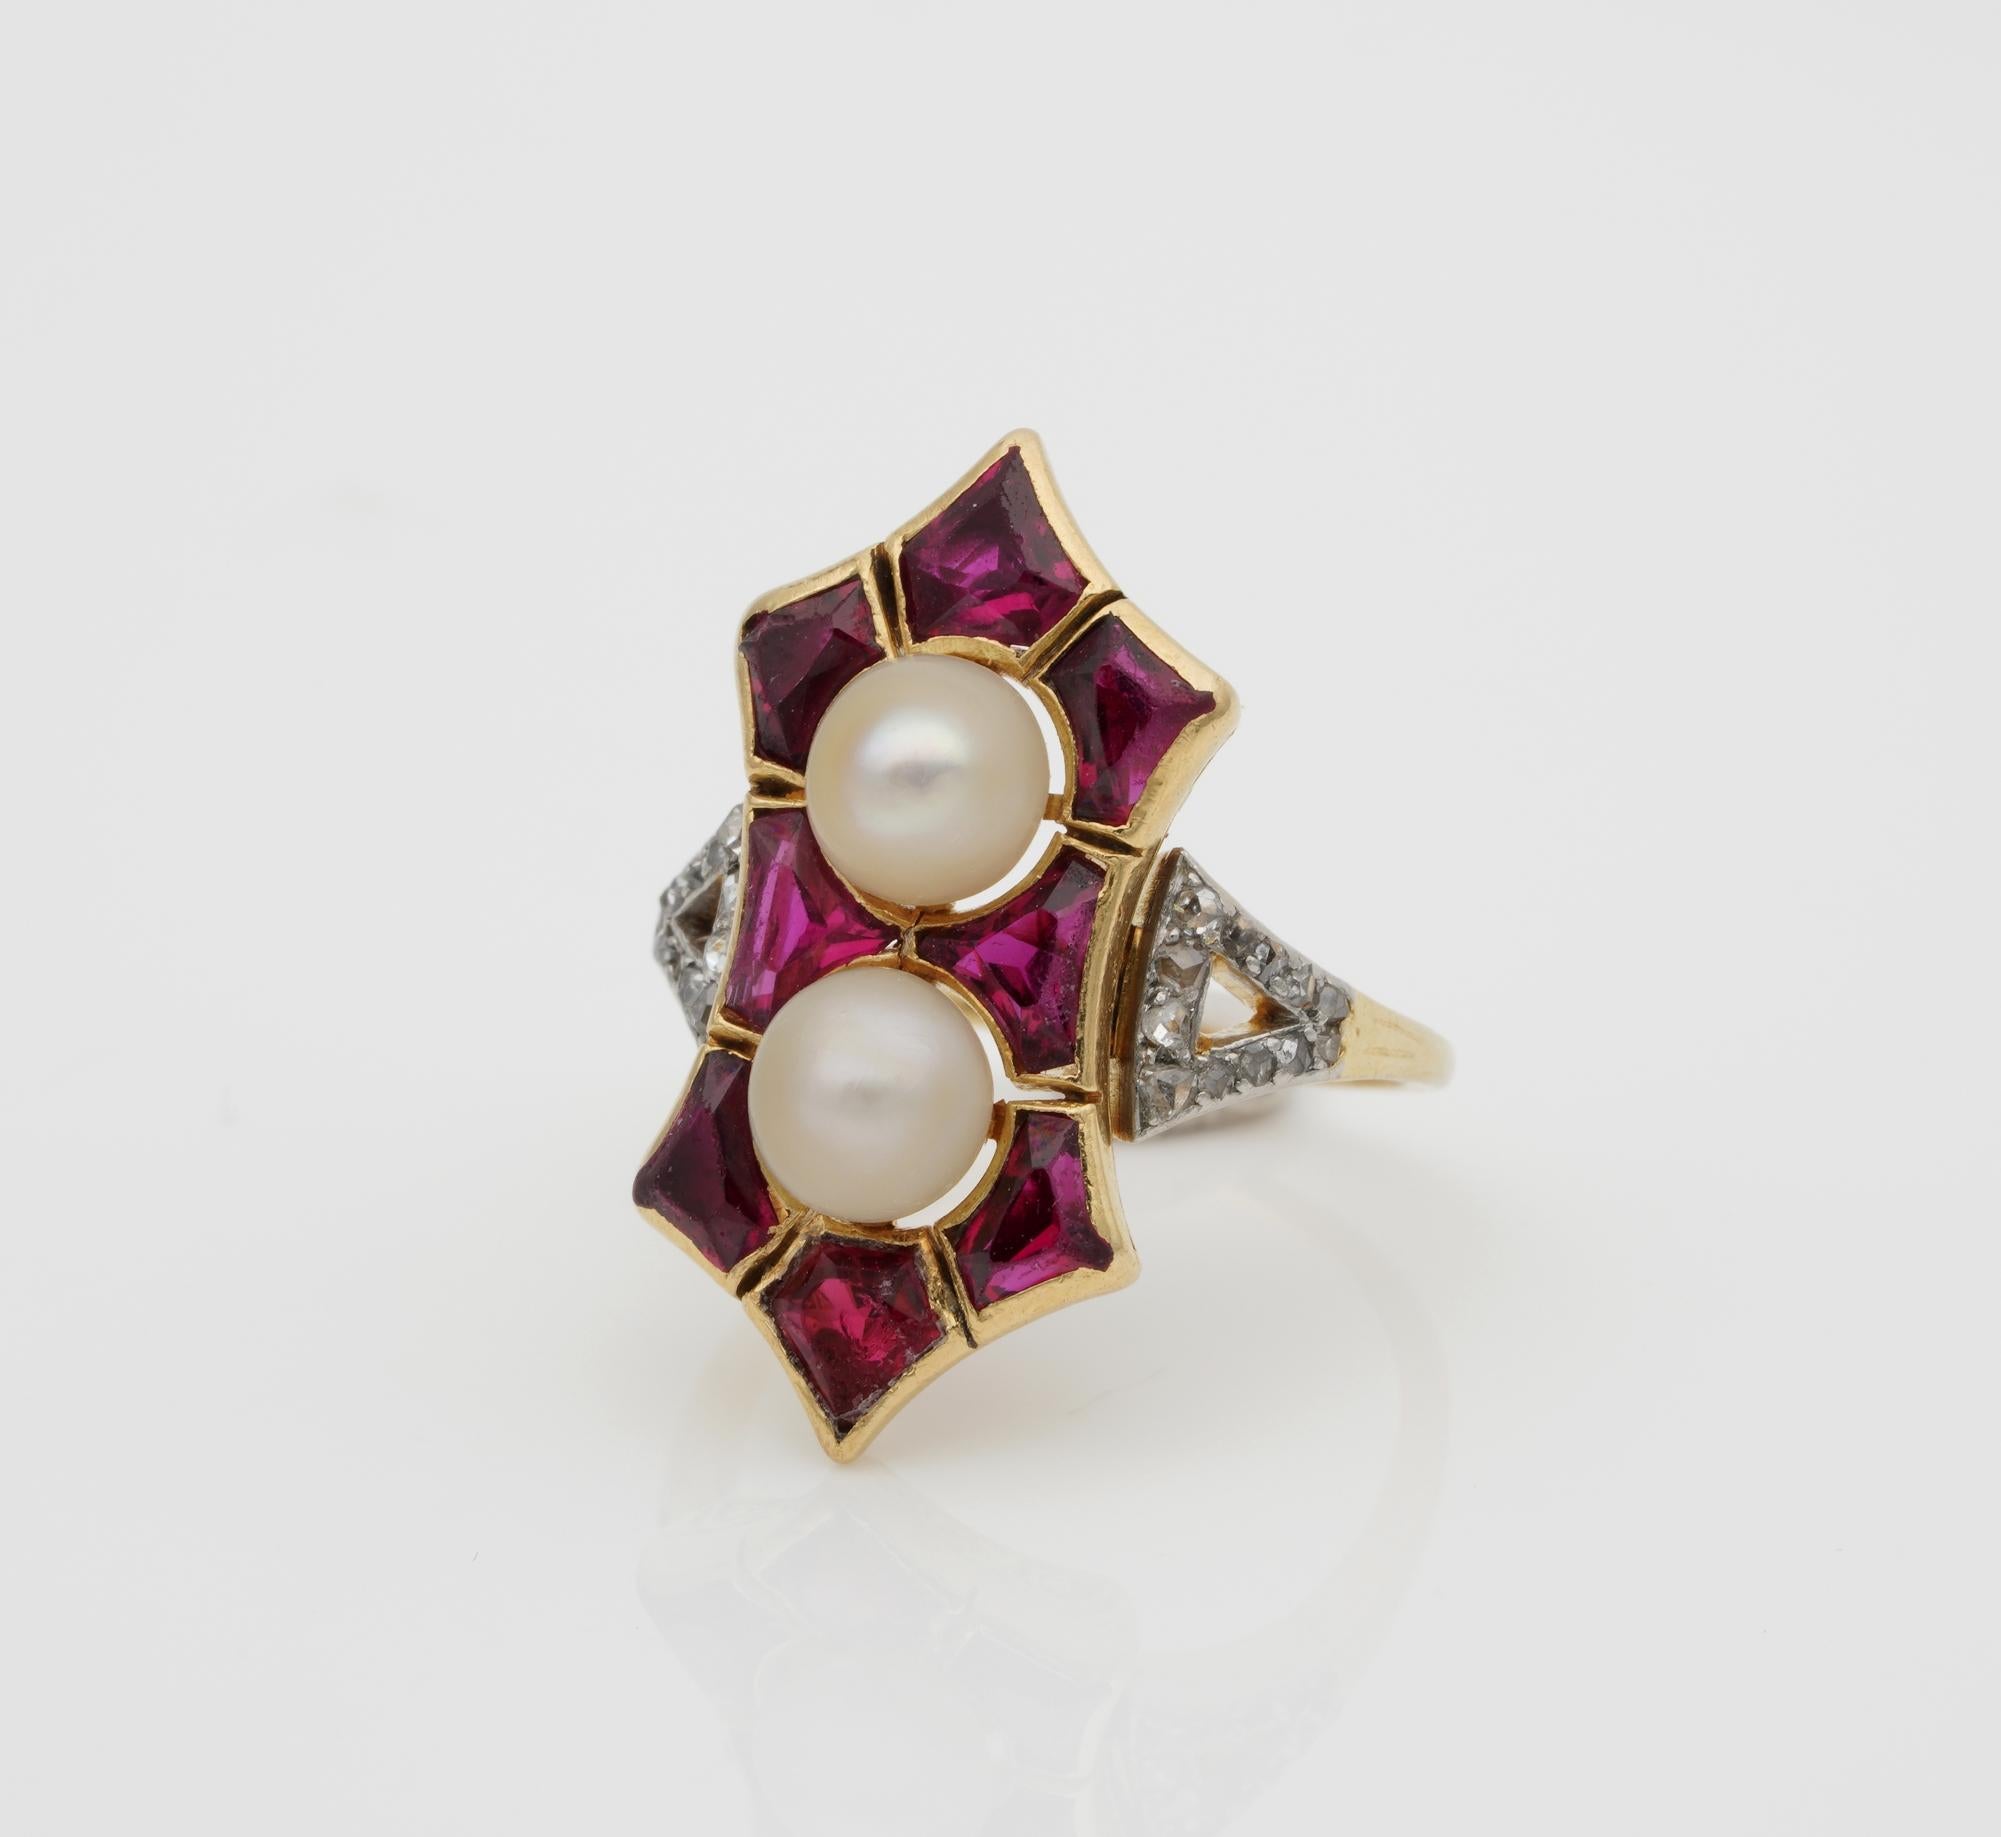 Uncut French Edwardian Rare 1.80 Carat Natural Siam Ruby Duo Natural Pearl Rare Ring For Sale